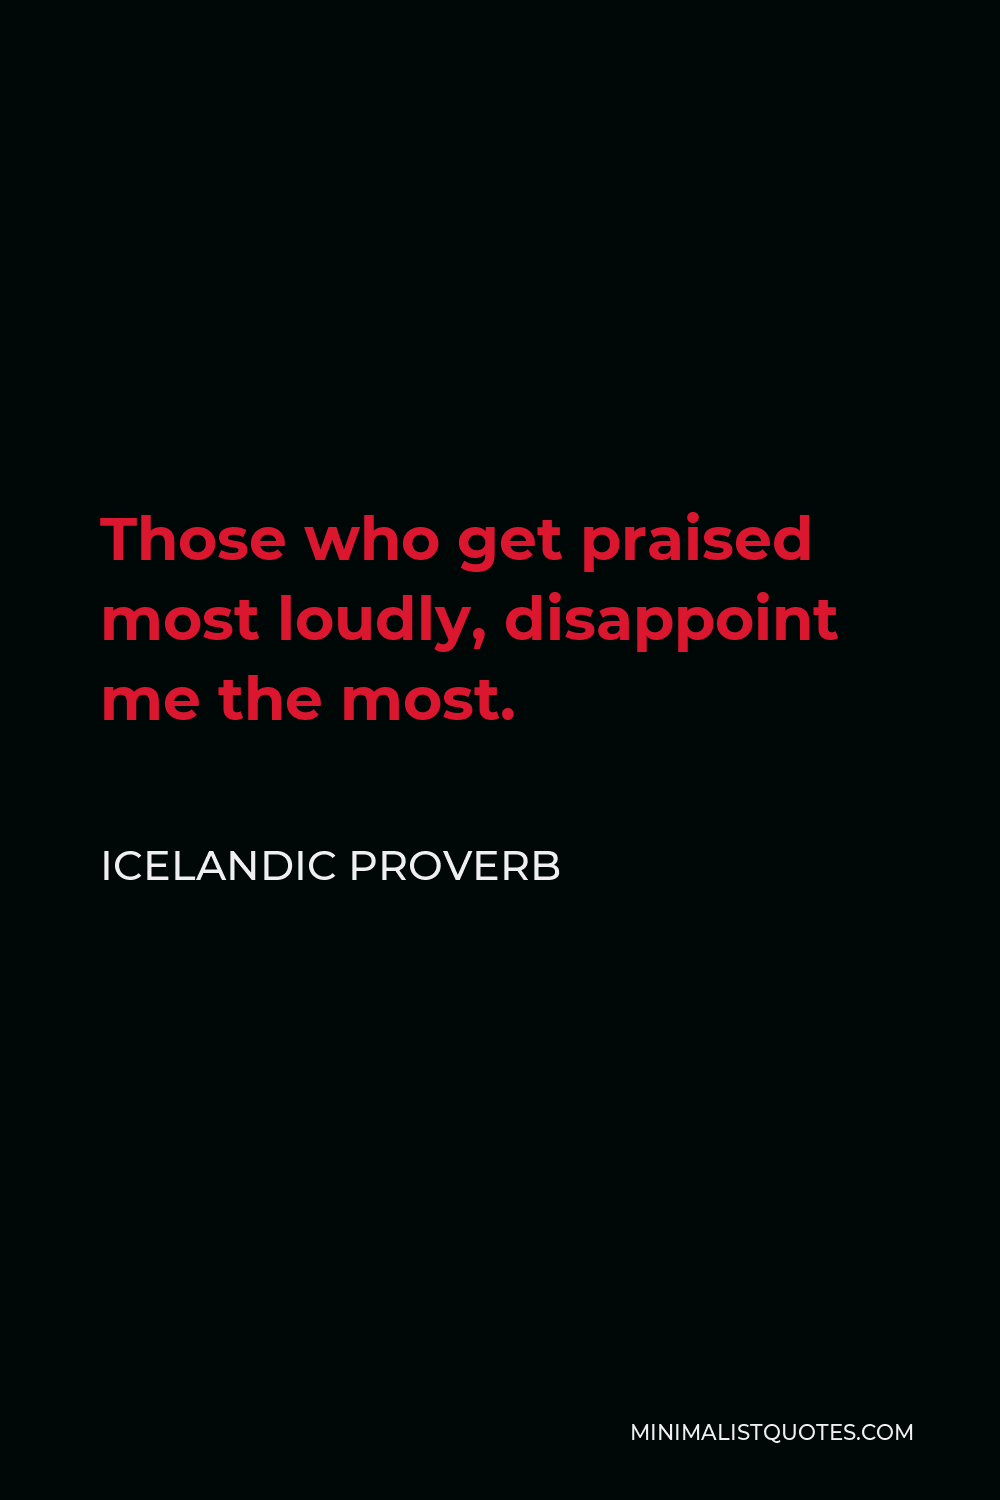 Icelandic Proverb Quote - Those who get praised most loudly, disappoint me the most.